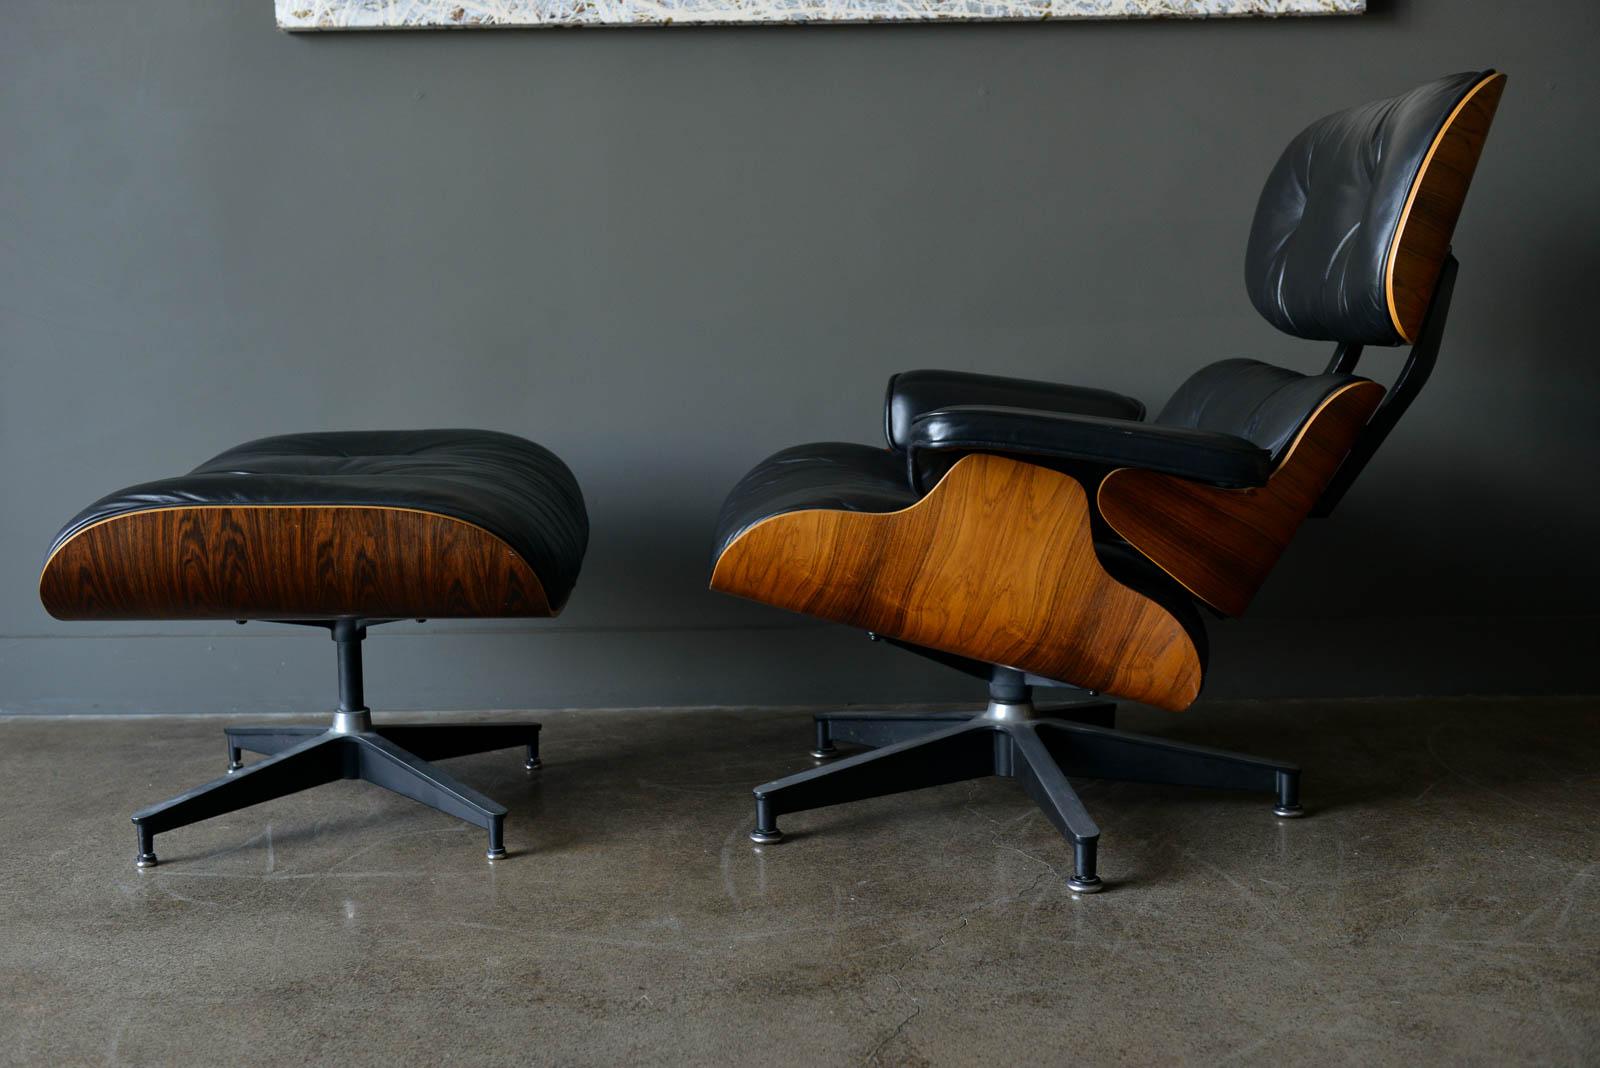 Charles Eames for Herman Miller Rosewood 670 Lounge Chair and 671 Ottoman, ca. 1971. Beautiful rosewood grain with original black leather cushions in very good original condition. Classic and always a favorite, the black leather compliments the